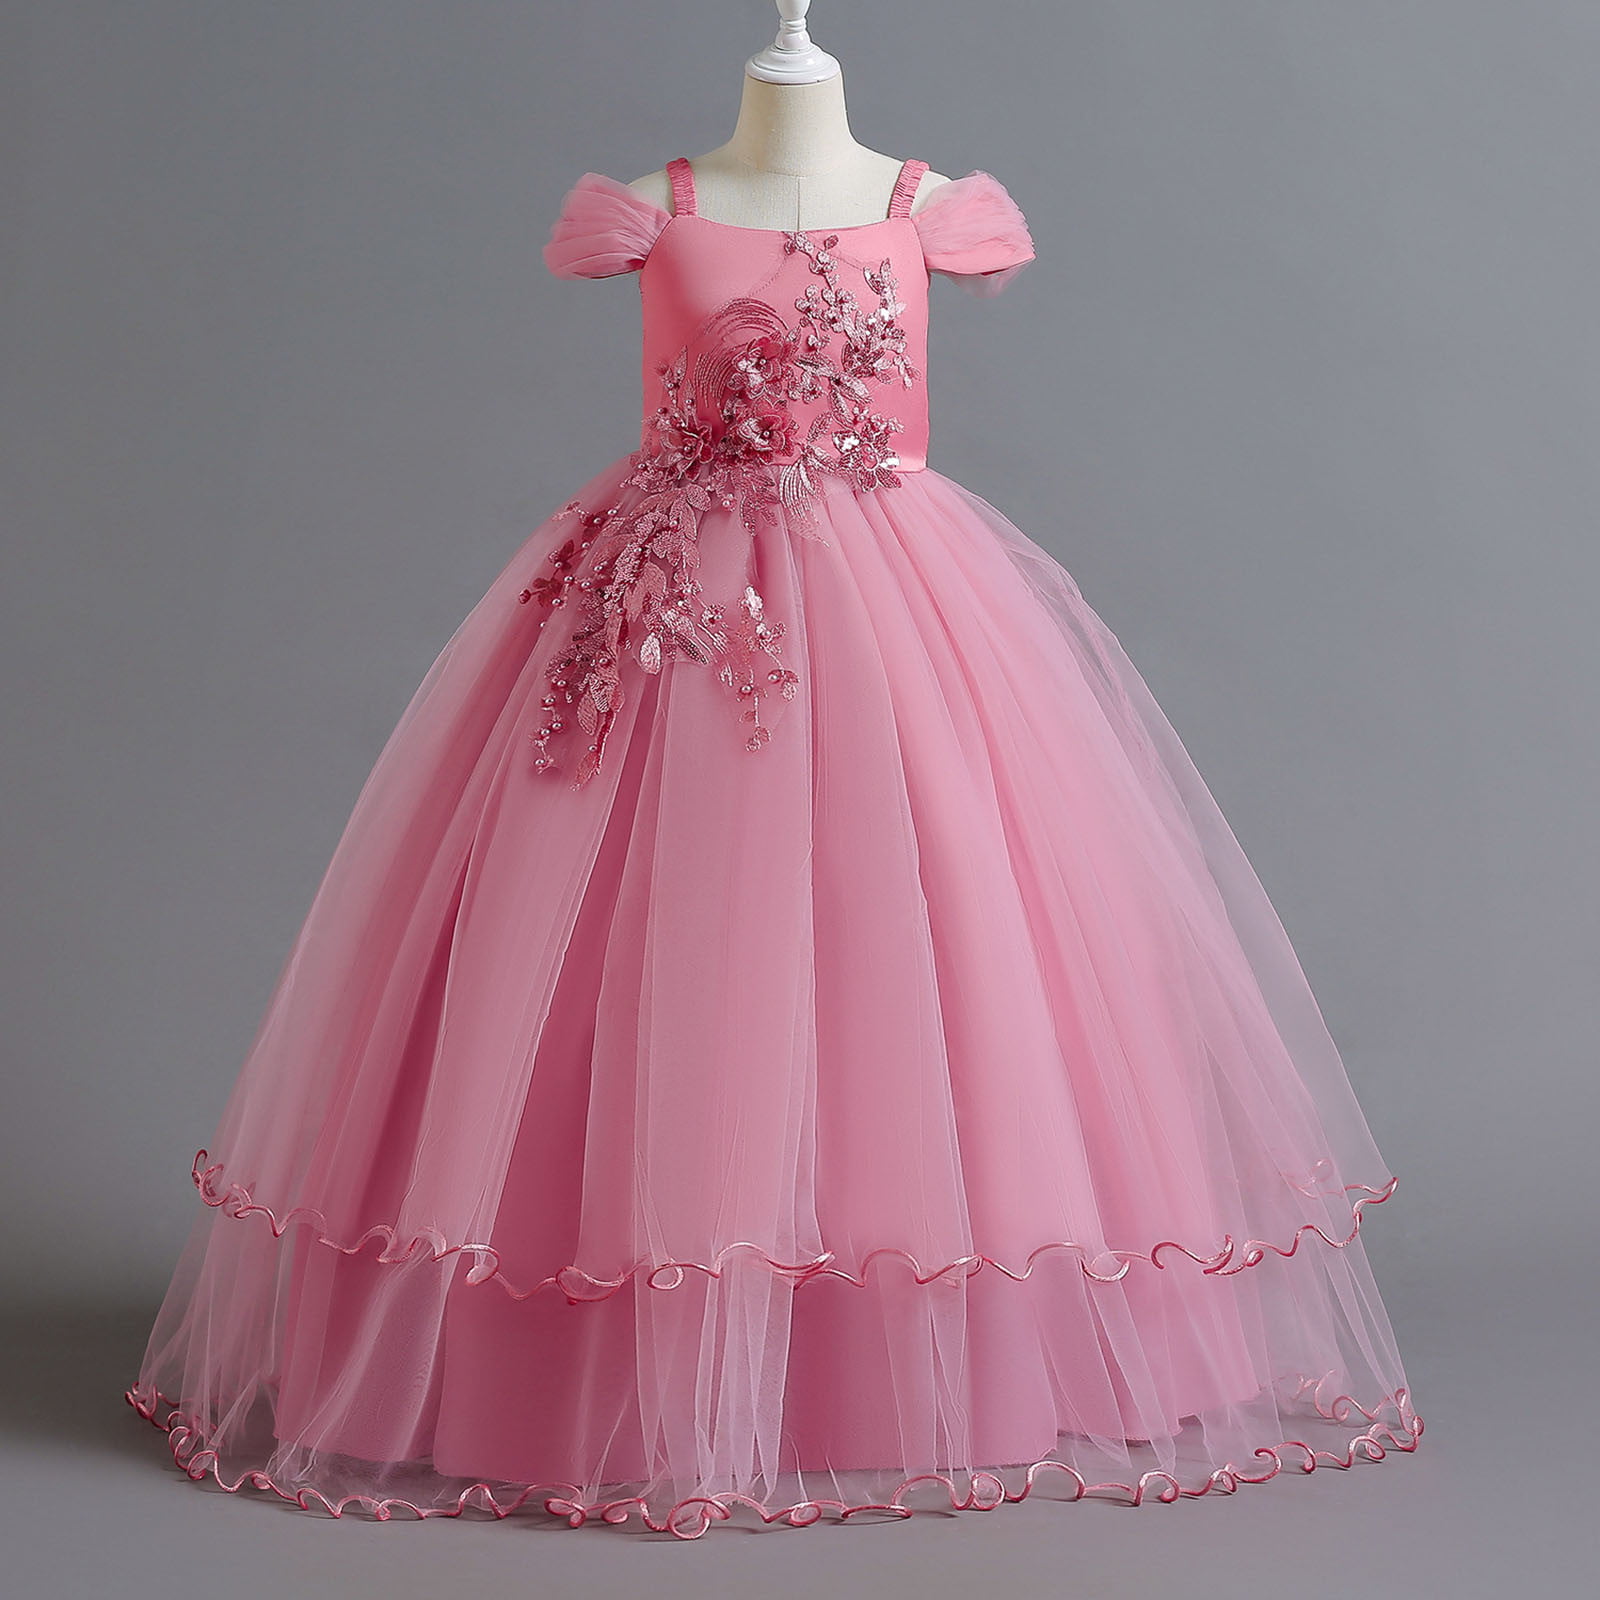 Girls Gowns, Buy Latest Gowns Designs 2023 Online for 1 to 16 Year Girls |  G3+ Fashion | Gowns for girls, Wedding dresses for kids, Frocks for girls